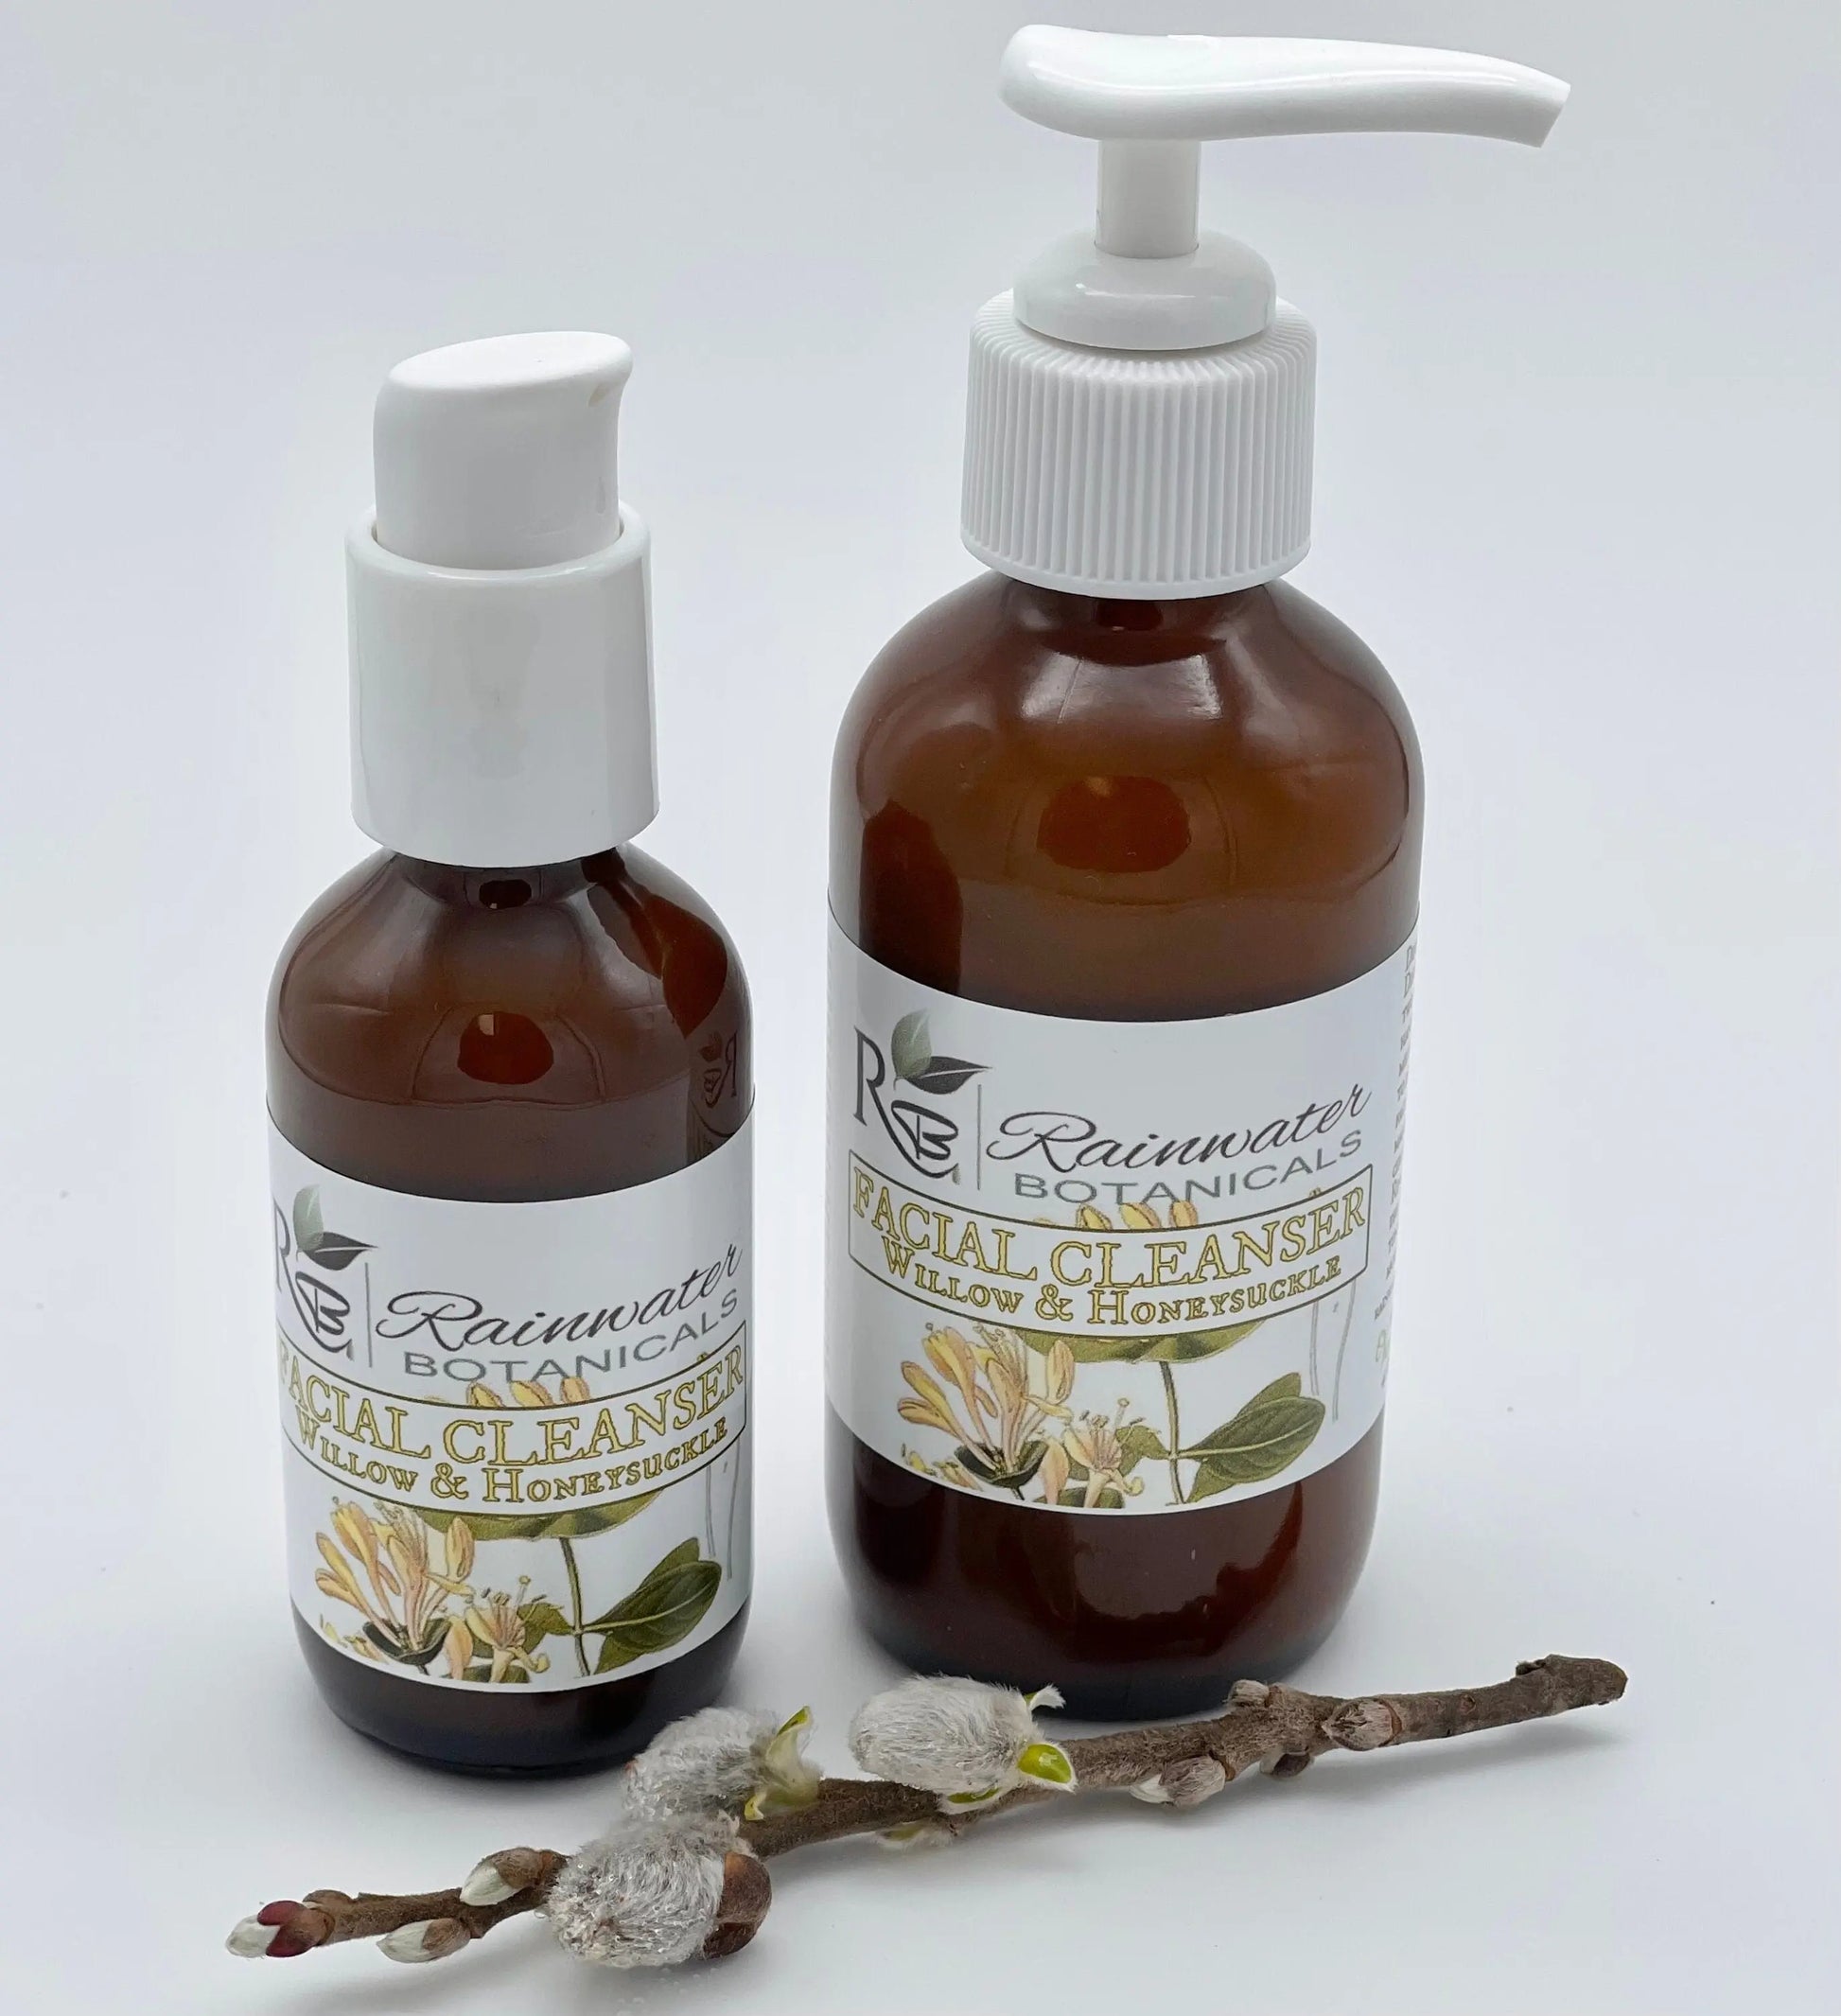 Natural Honeysuckle Extract Water Soluble 2 oz